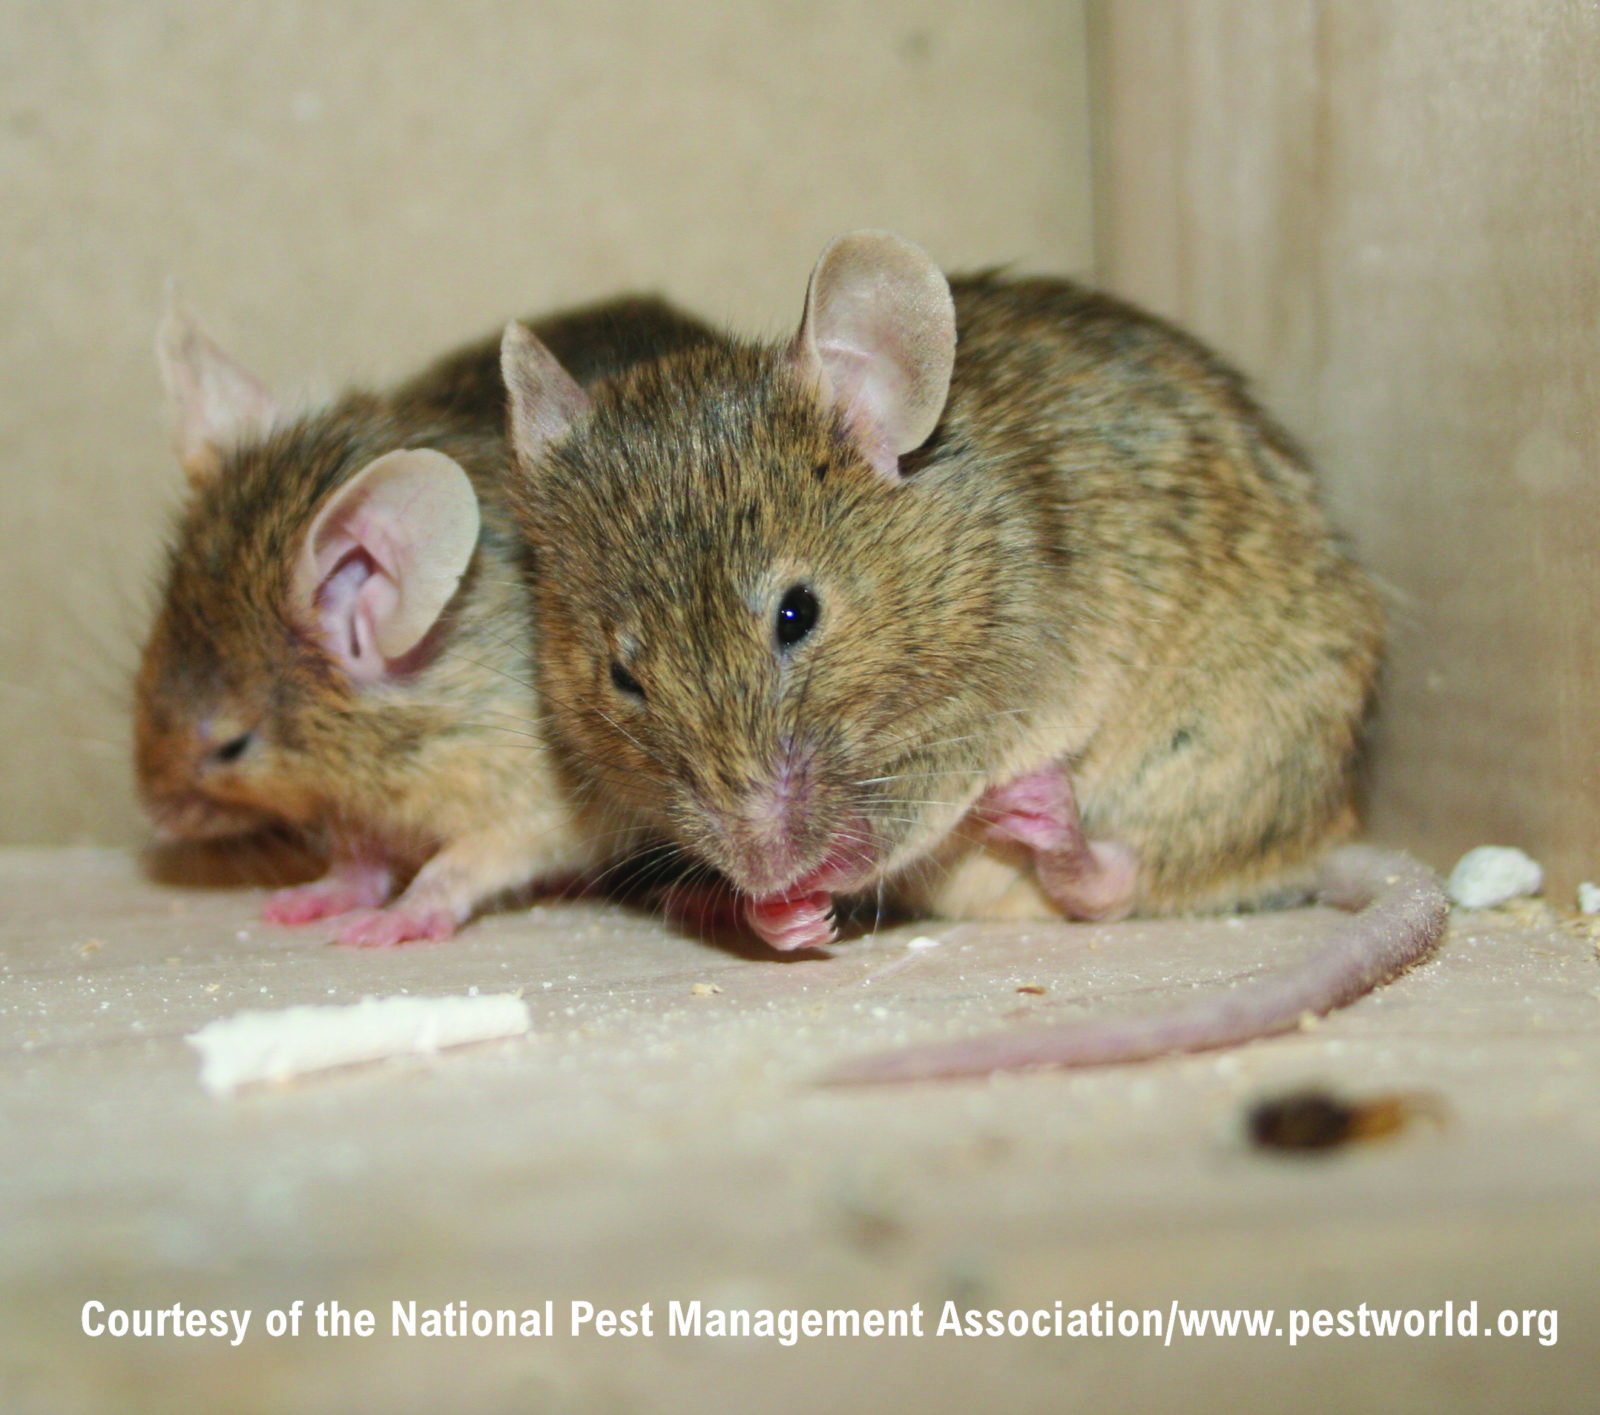 Getting Rid Of Mice: What’s The Big Deal?